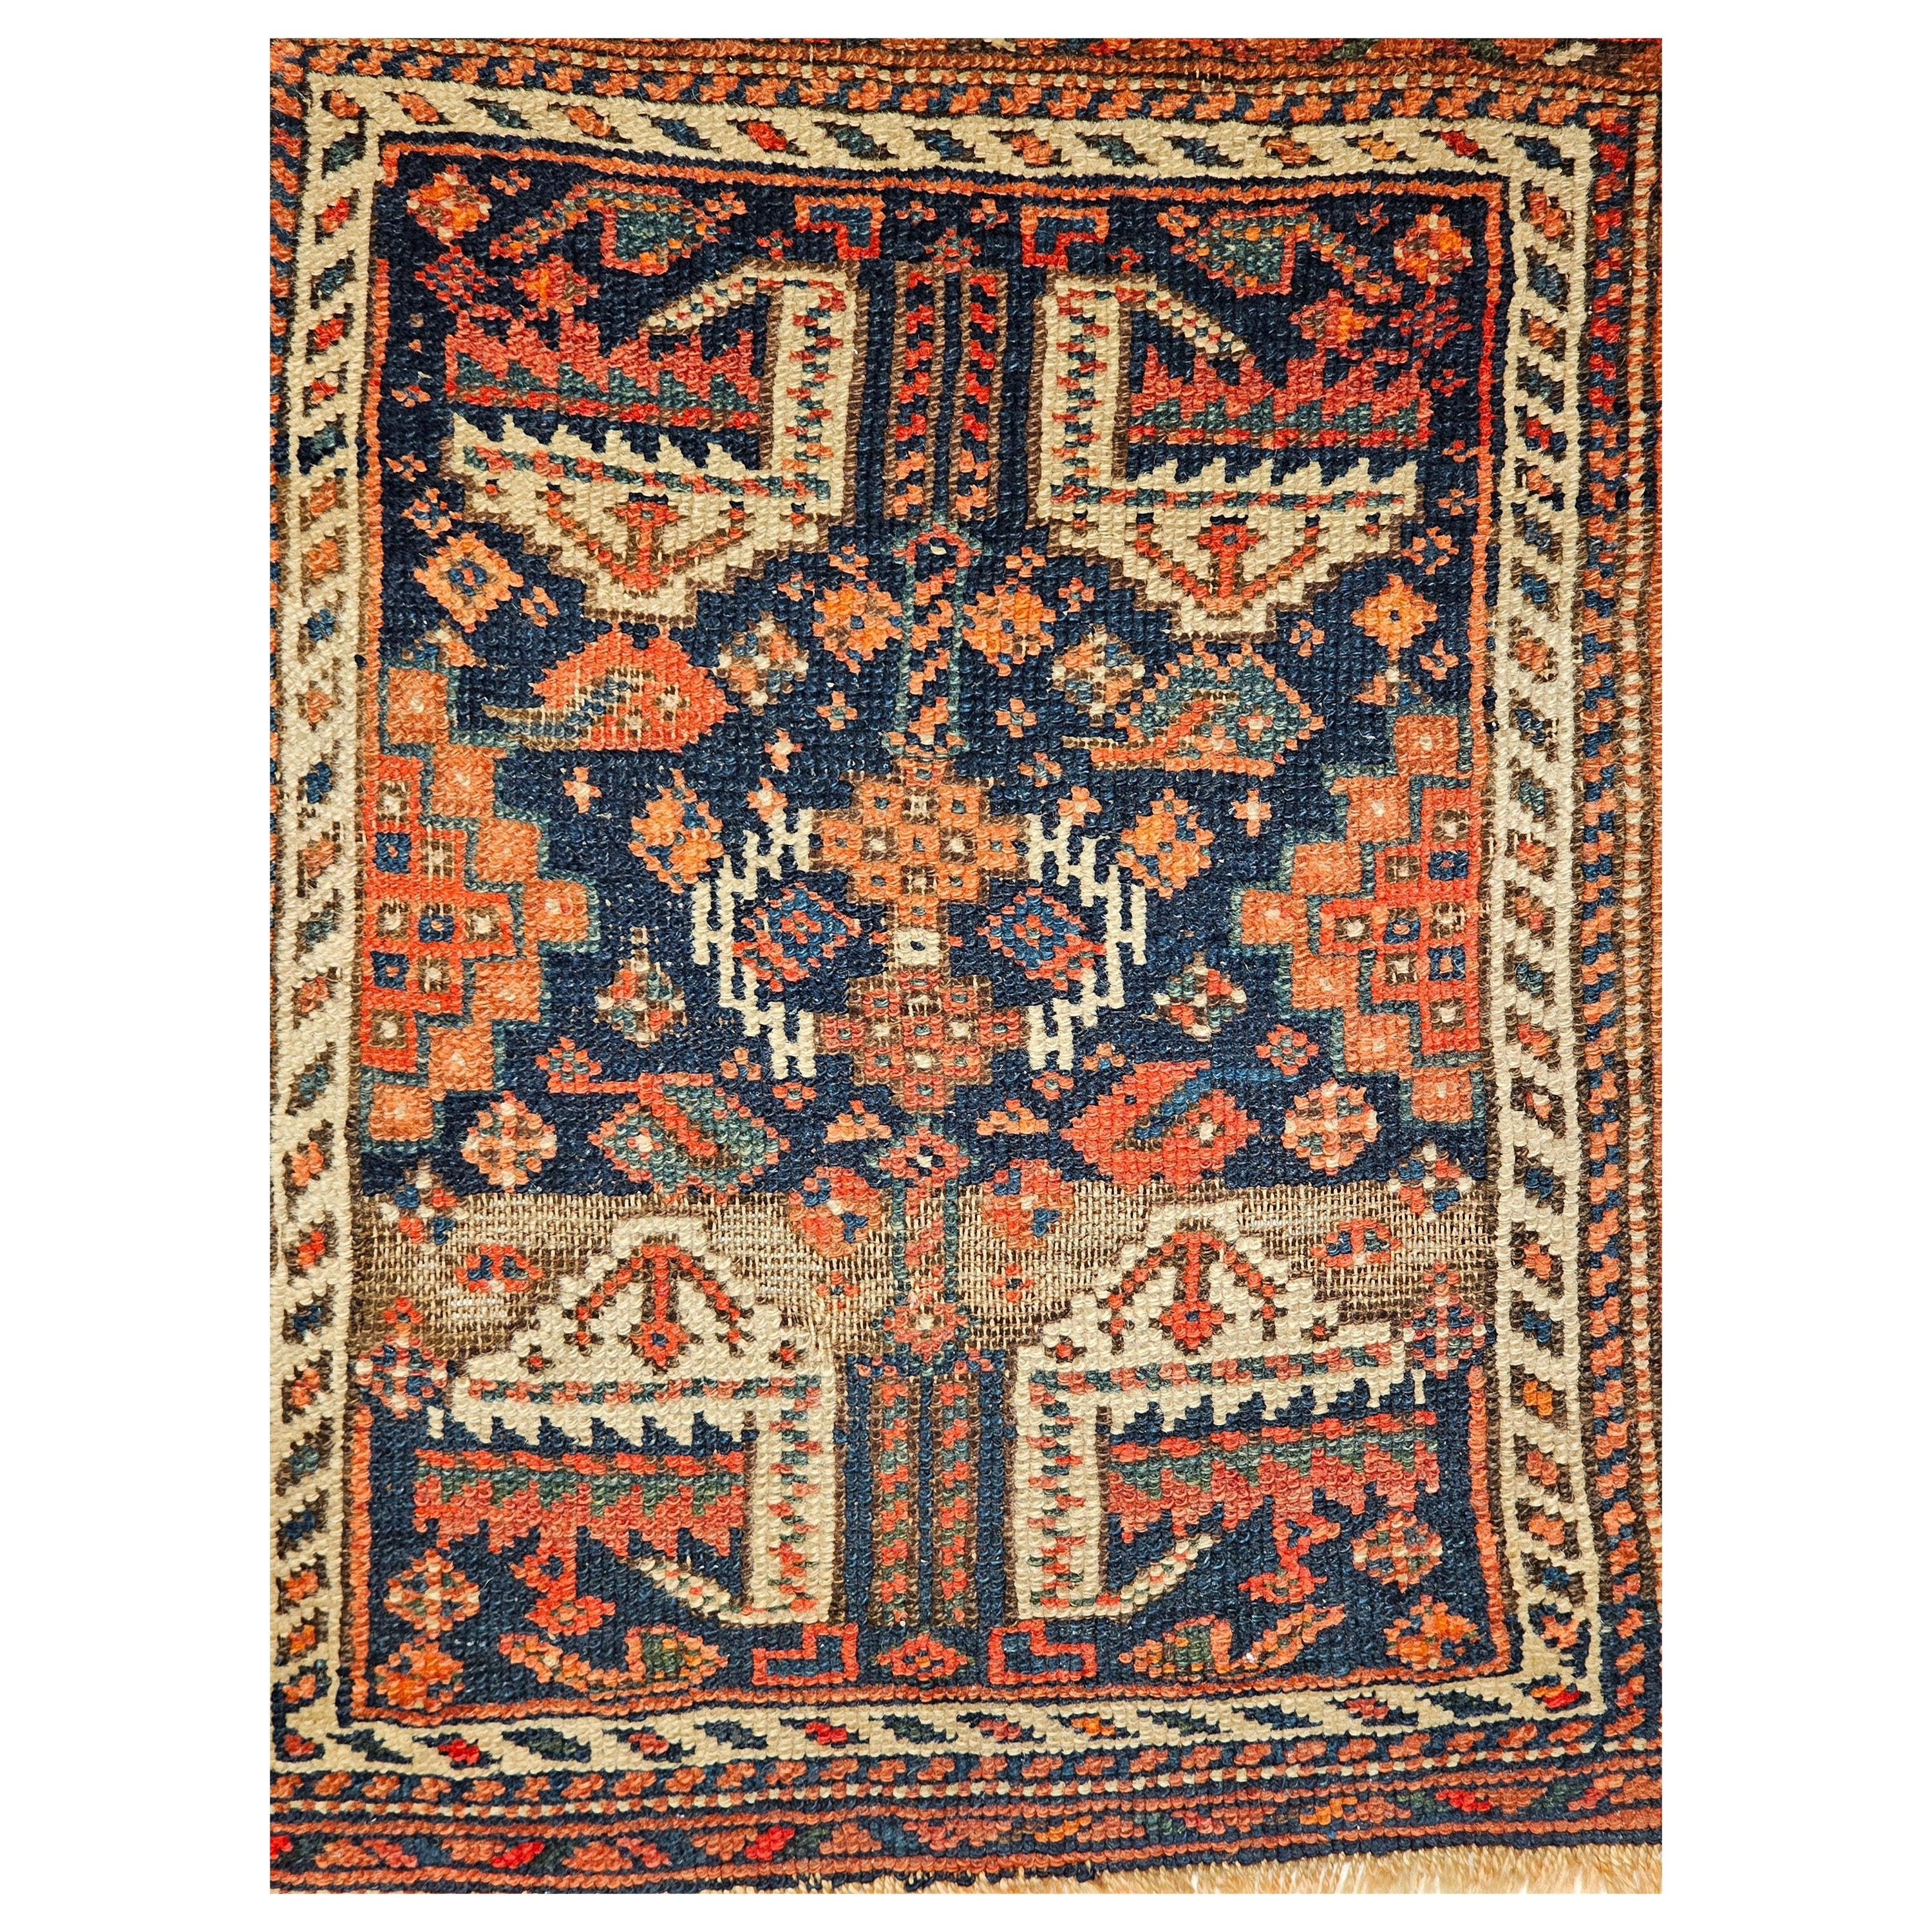 19th Century Persian Afshar Tribal Bagface Used as Nomadic People Wall Art For Sale